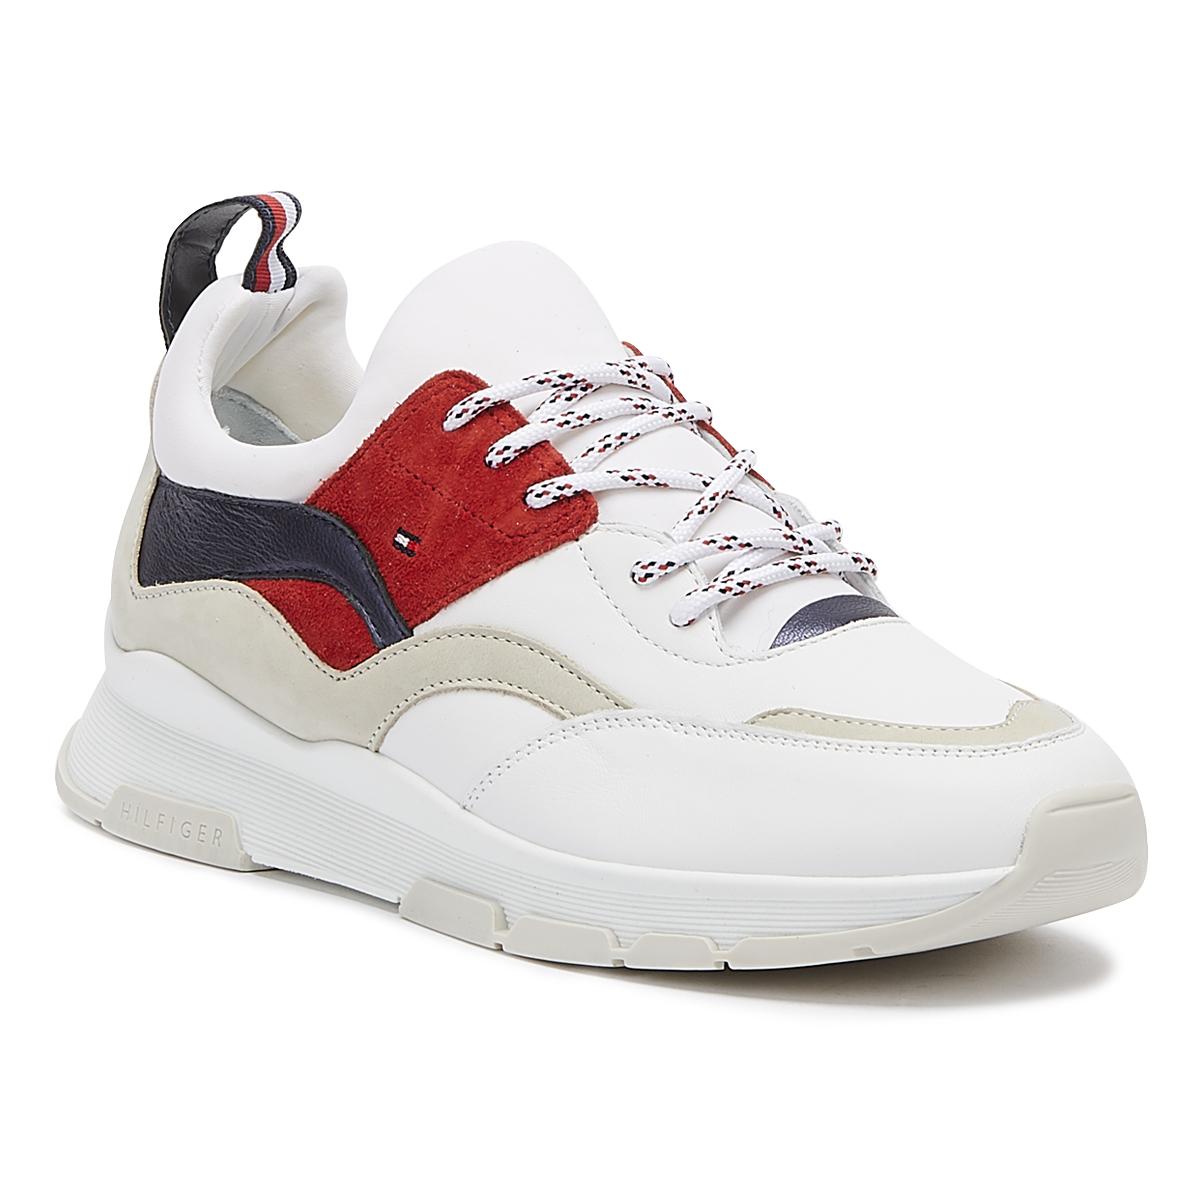 Tommy Hilfiger Leather Lifestyle Womens Rwb Trainers in White - Lyst